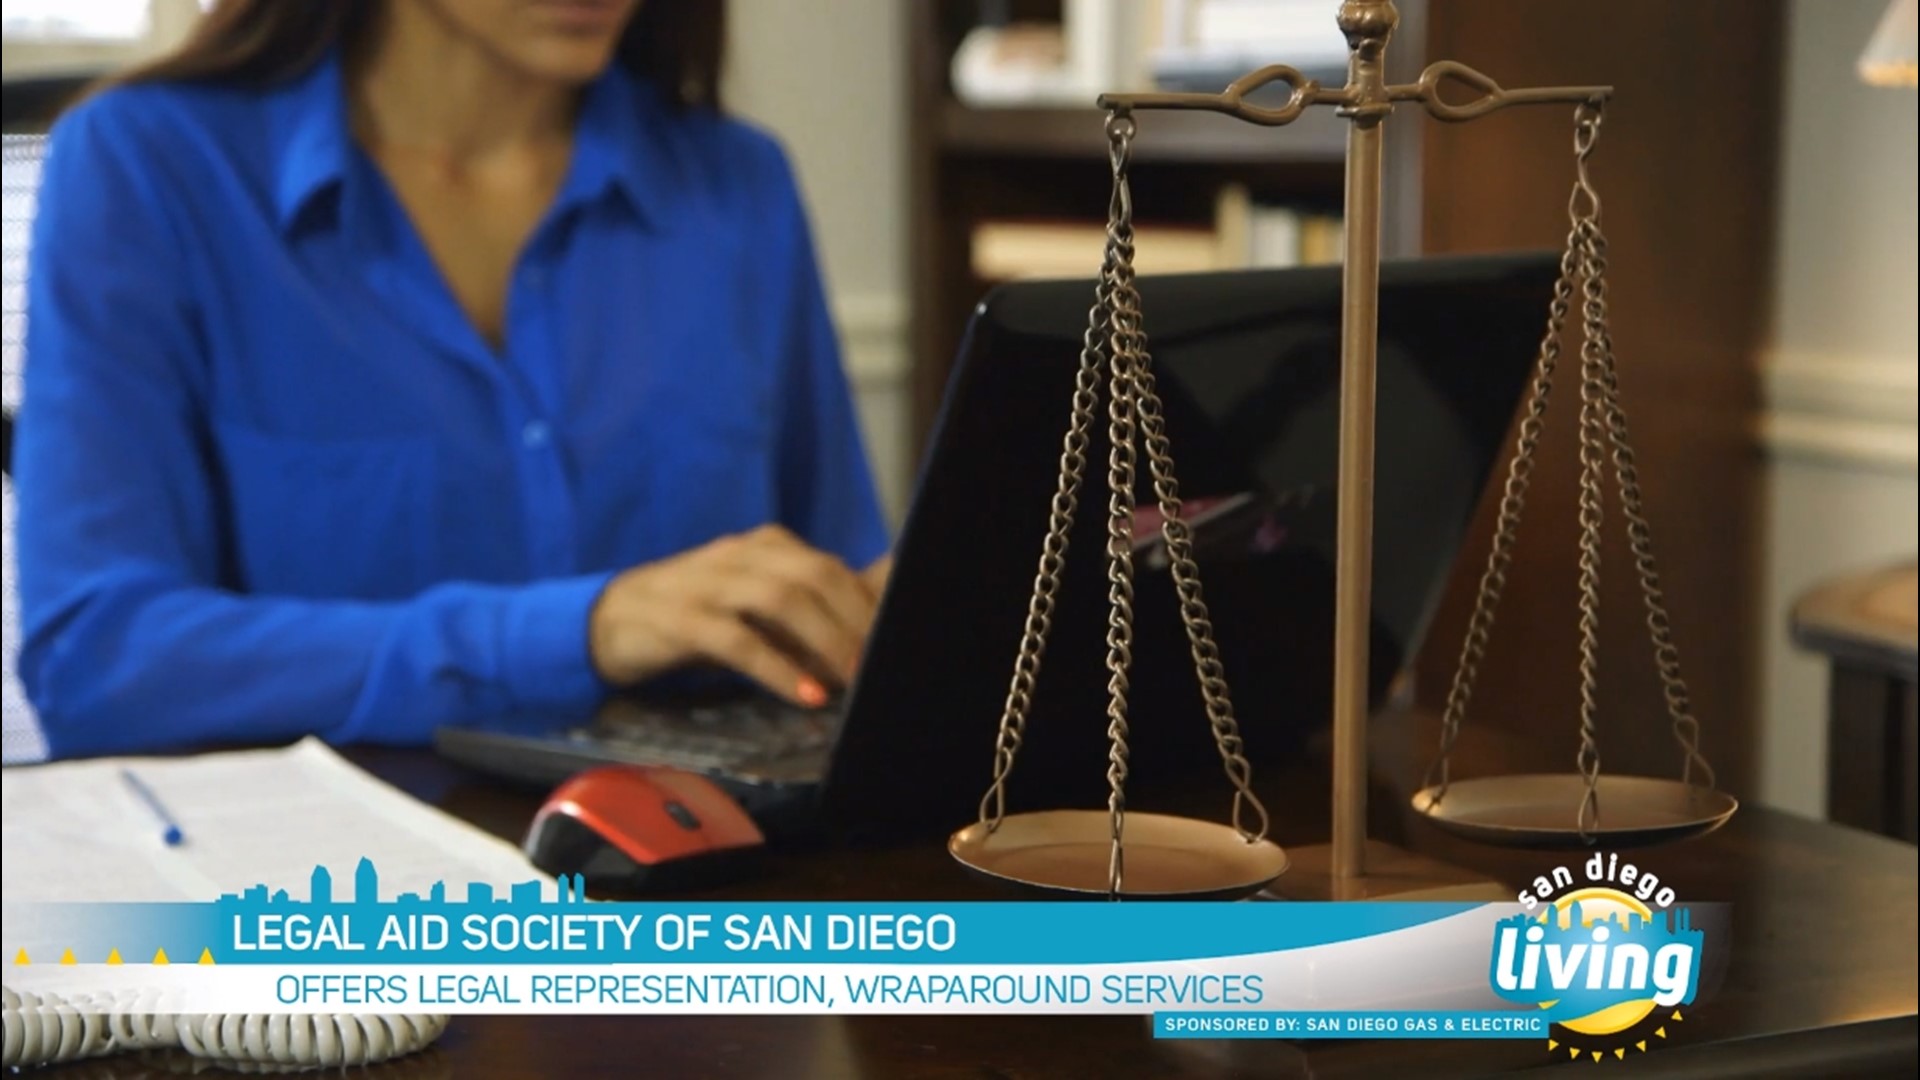 For more than 100 years, Legal Aid Society has been the largest provider of free legal services in San Diego County to low-income San Diegans. Sponsored by: SDG&E